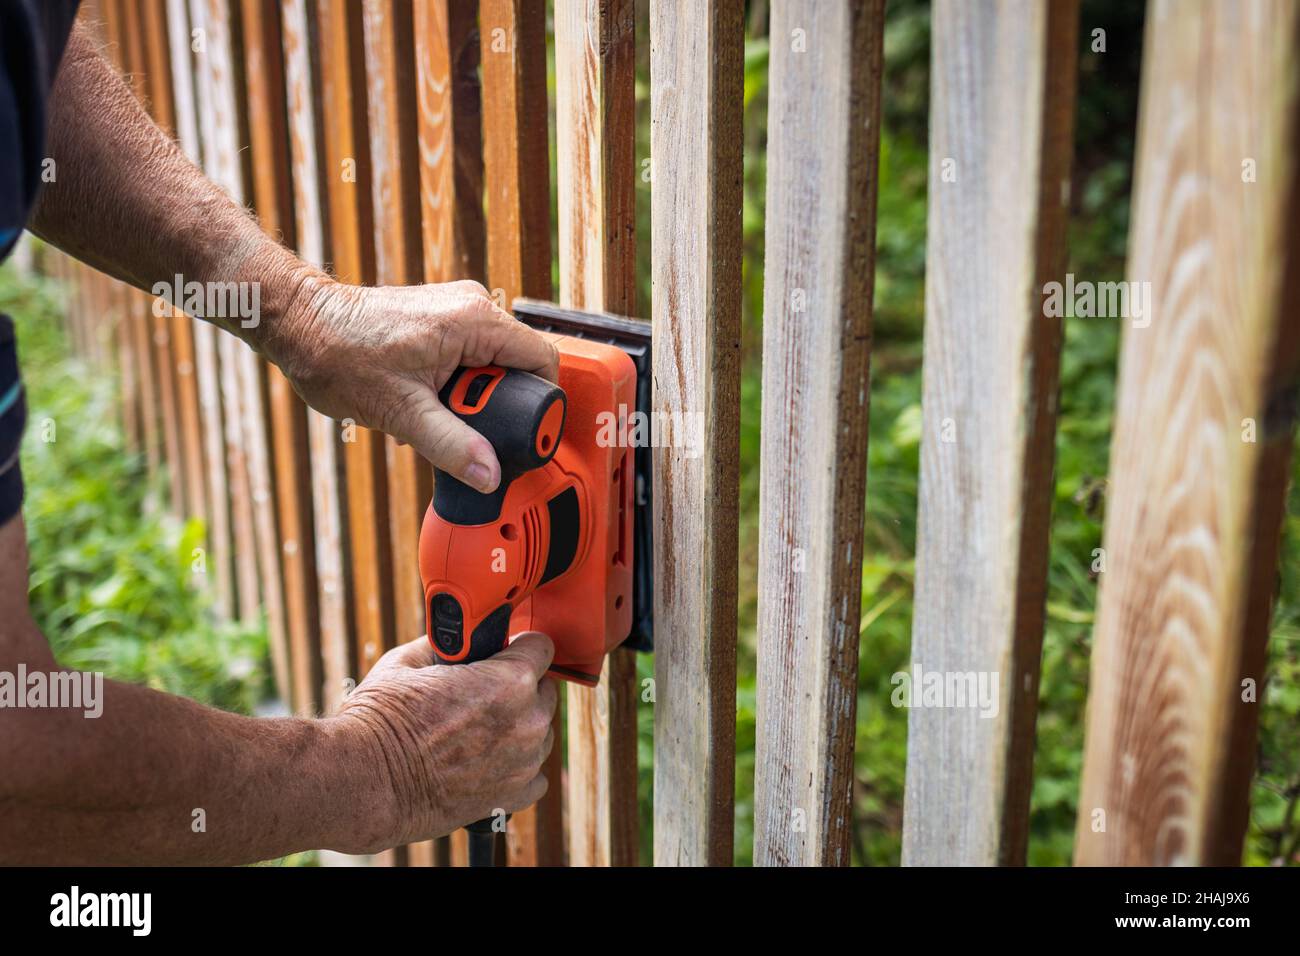 Sanding wooden picket fence. Electric vibrating power tool grinder. Sander in hands Stock Photo